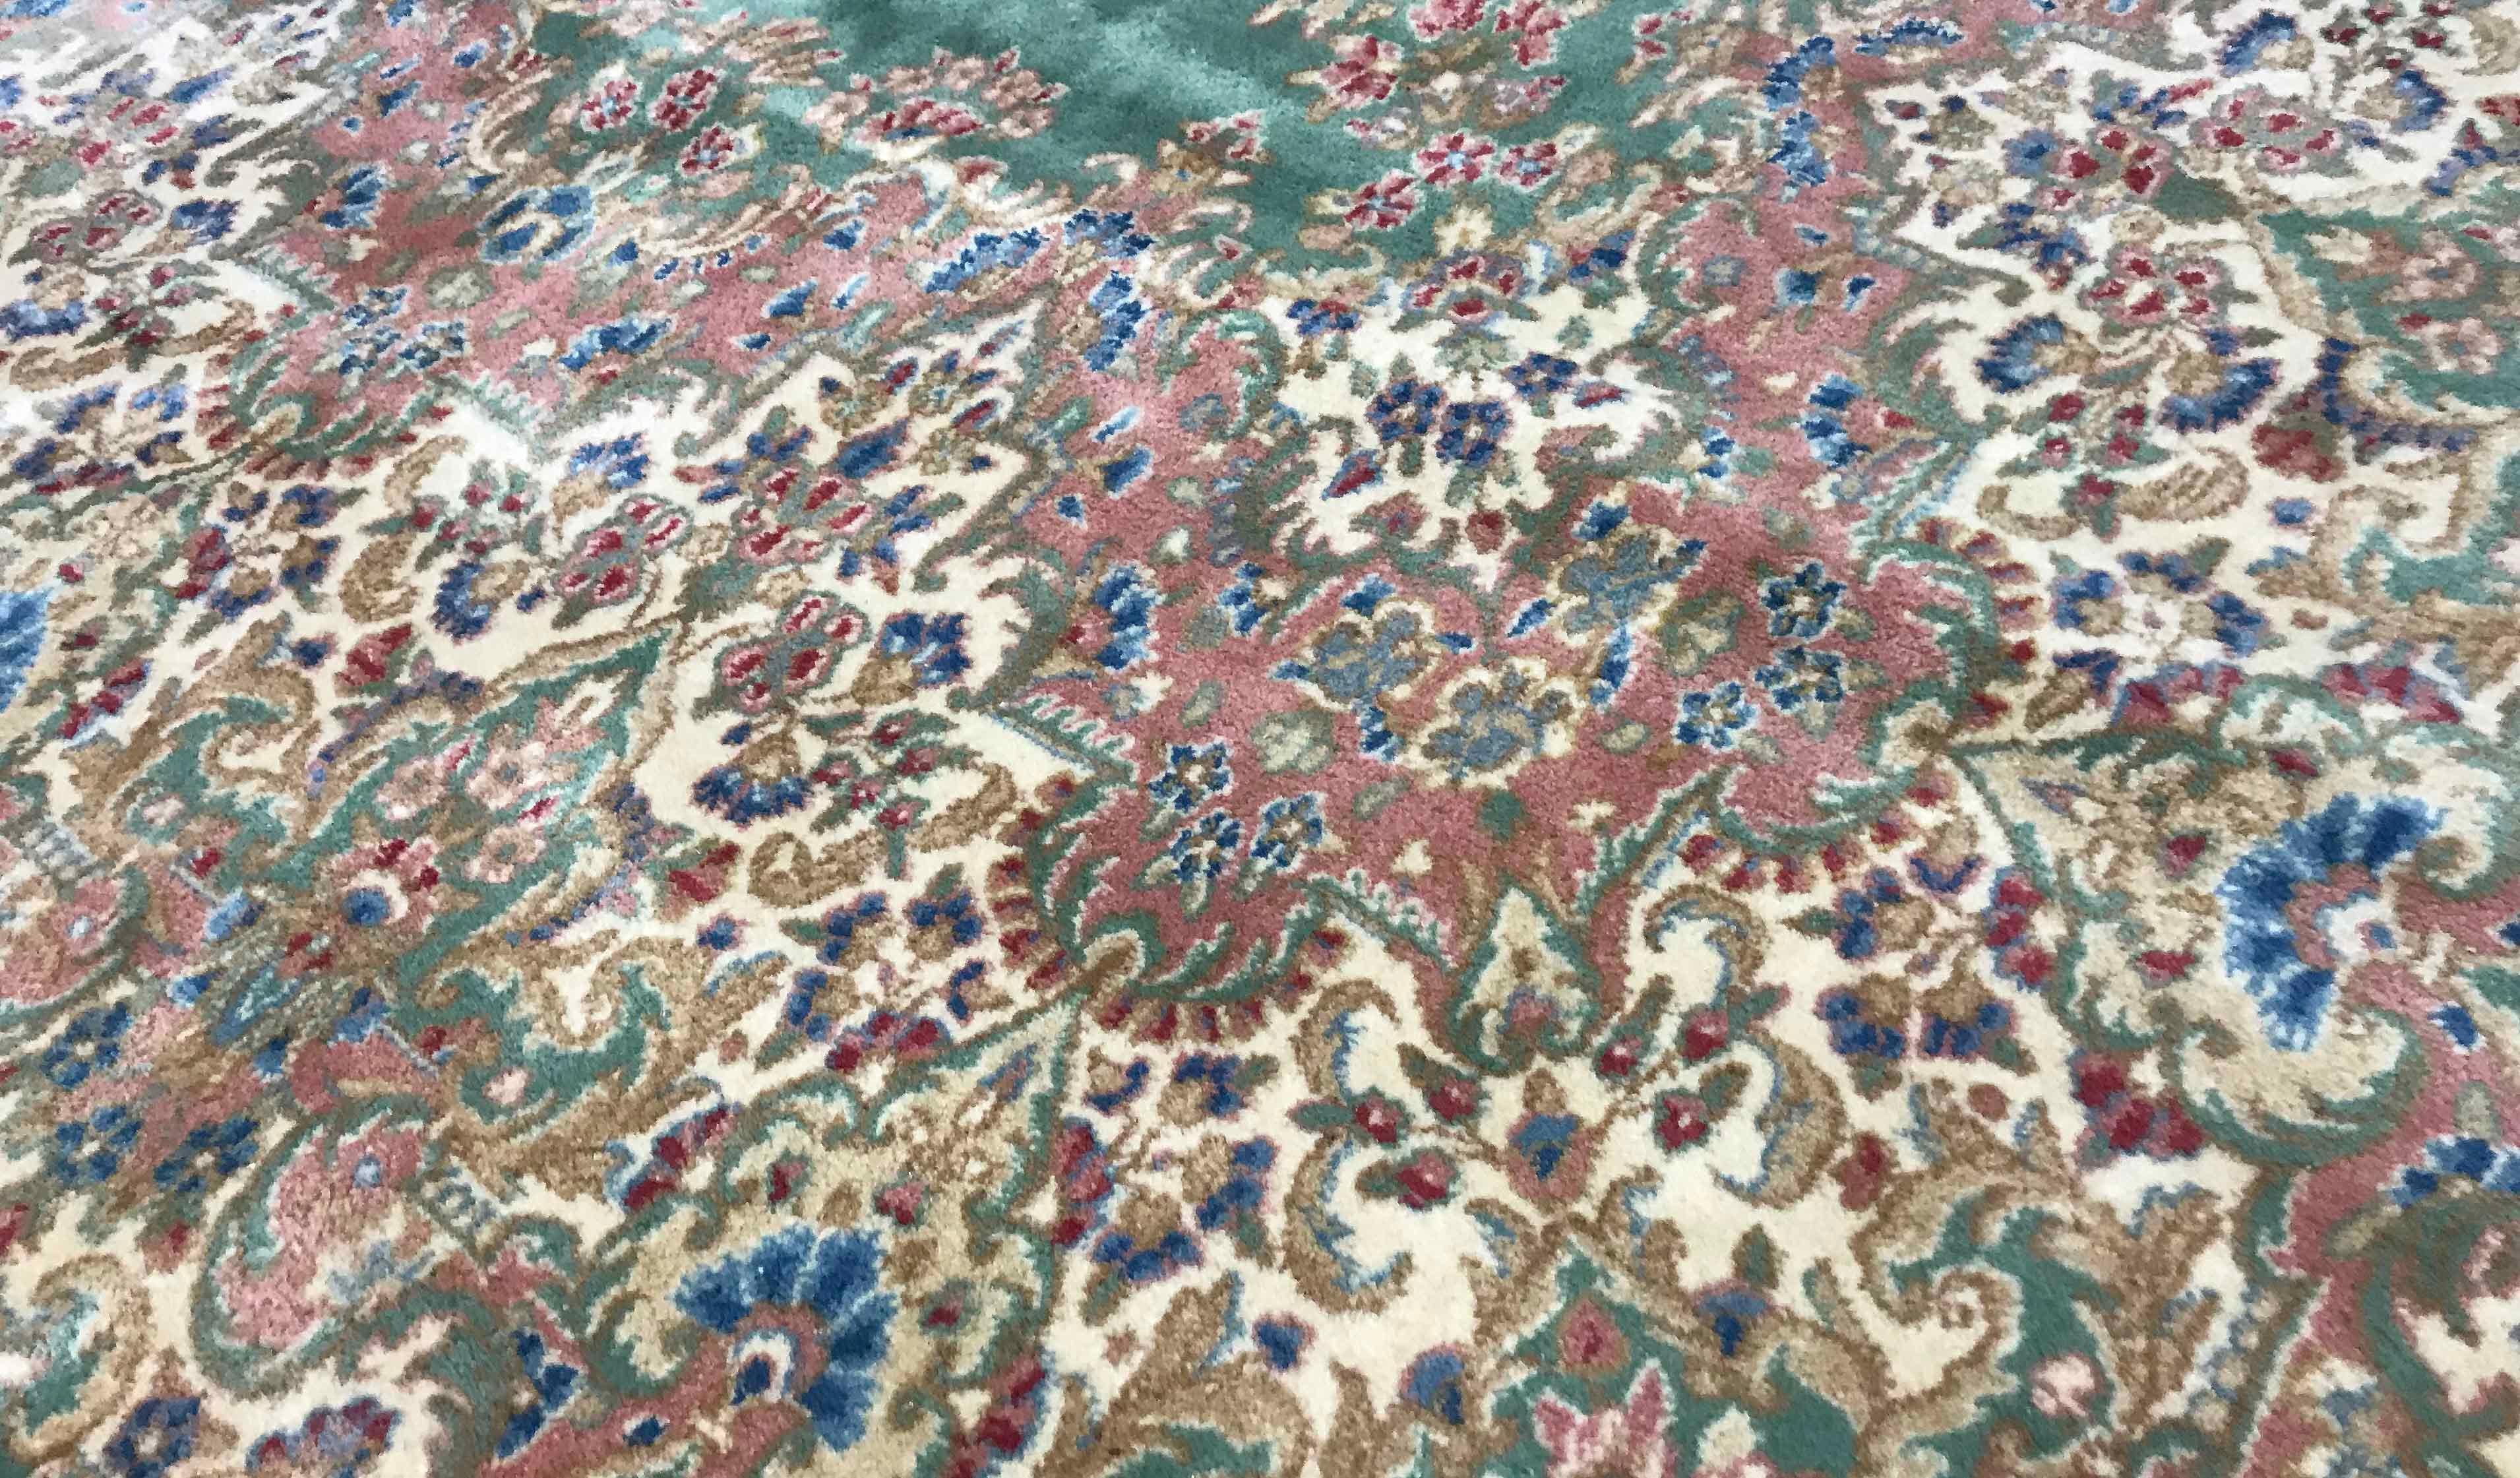 Vintage Persian Kerman, circa 1940. A delightful color combination of soft pastel shades is incorporated in this Kerman rug with the soft green field enclosing a central medallion in soft pastel colors with floral designs repeated around the sides